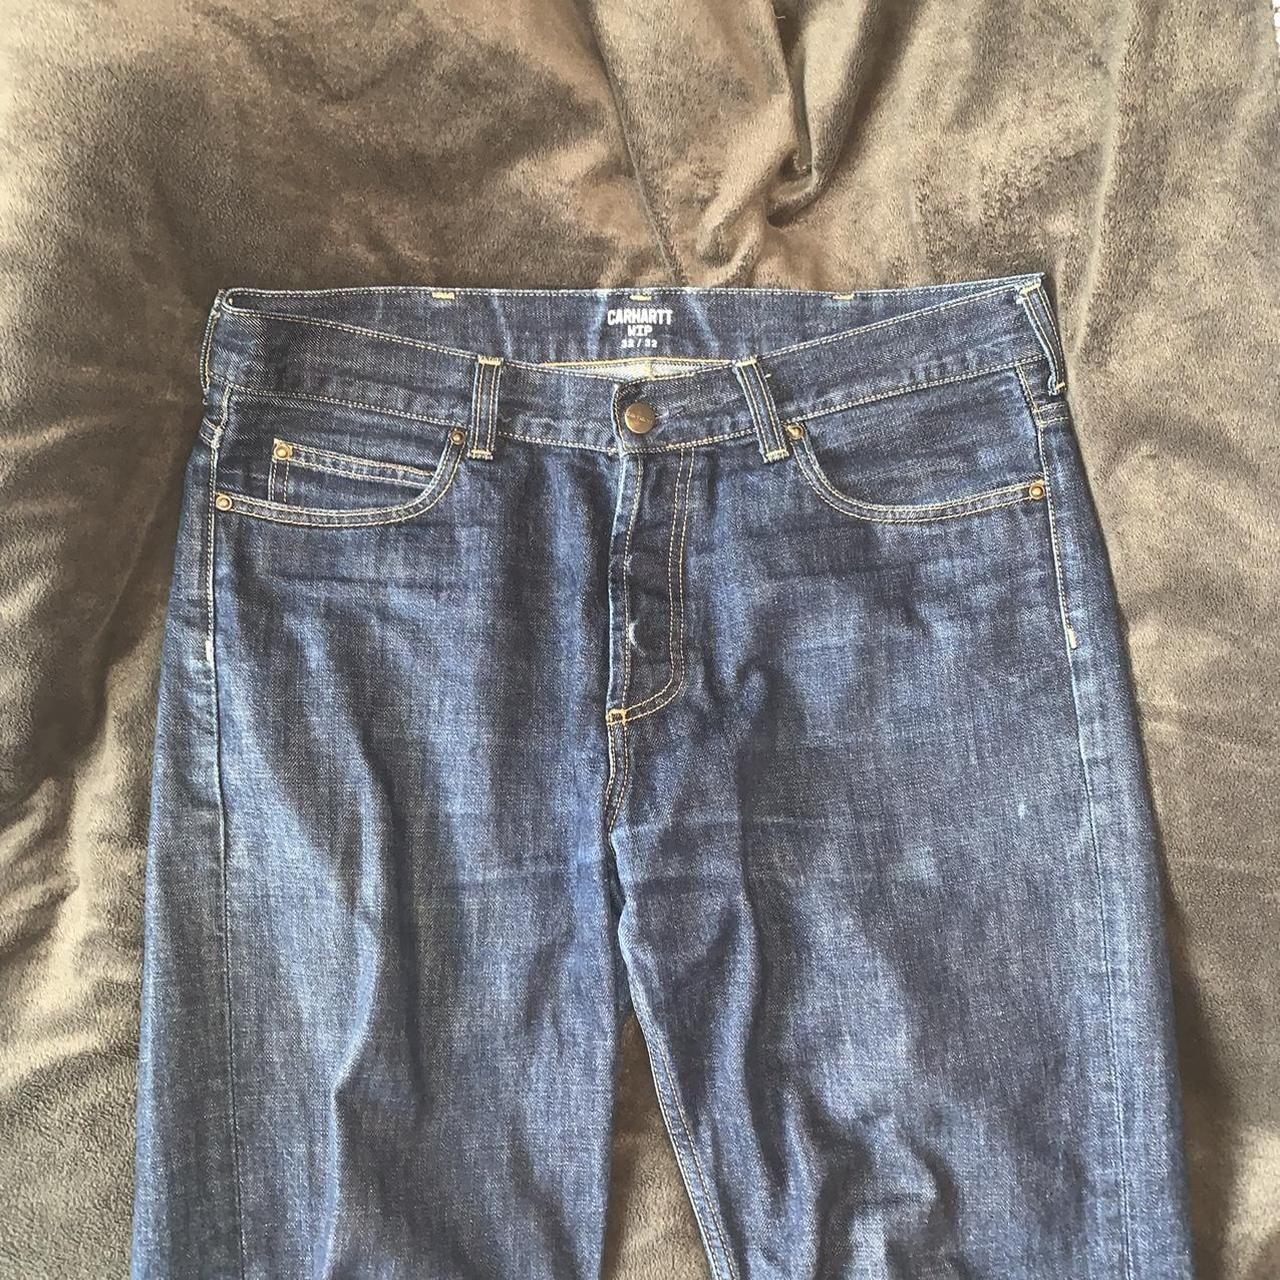 Carhartt WIP Marlow Pant / Jeans. 32 x 32. Some... - Depop